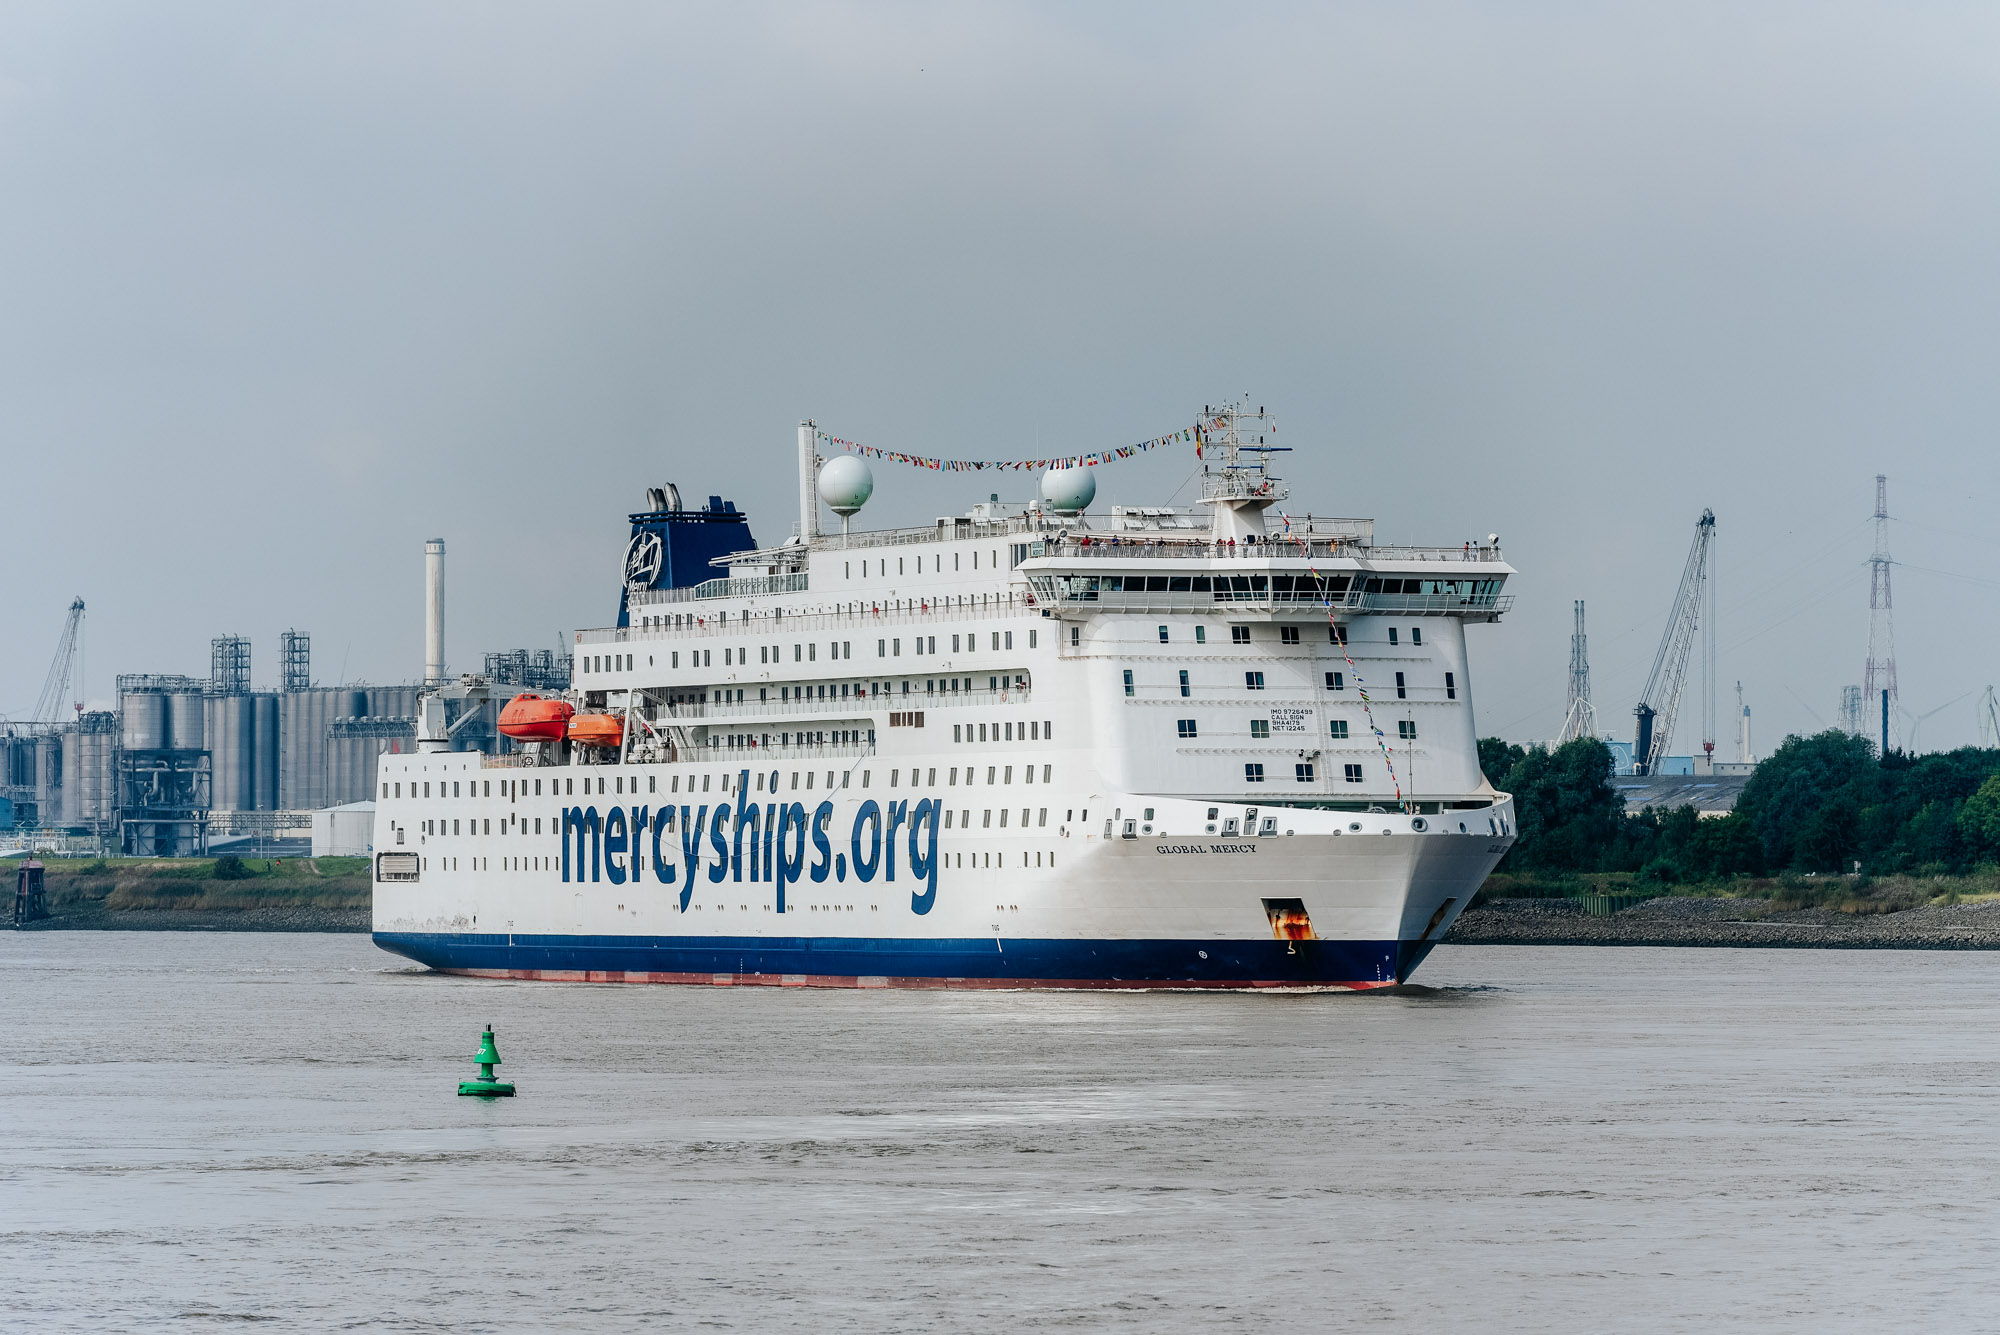 The Global Mercy(TM) is being outfitted for service in the Port of Antwerp